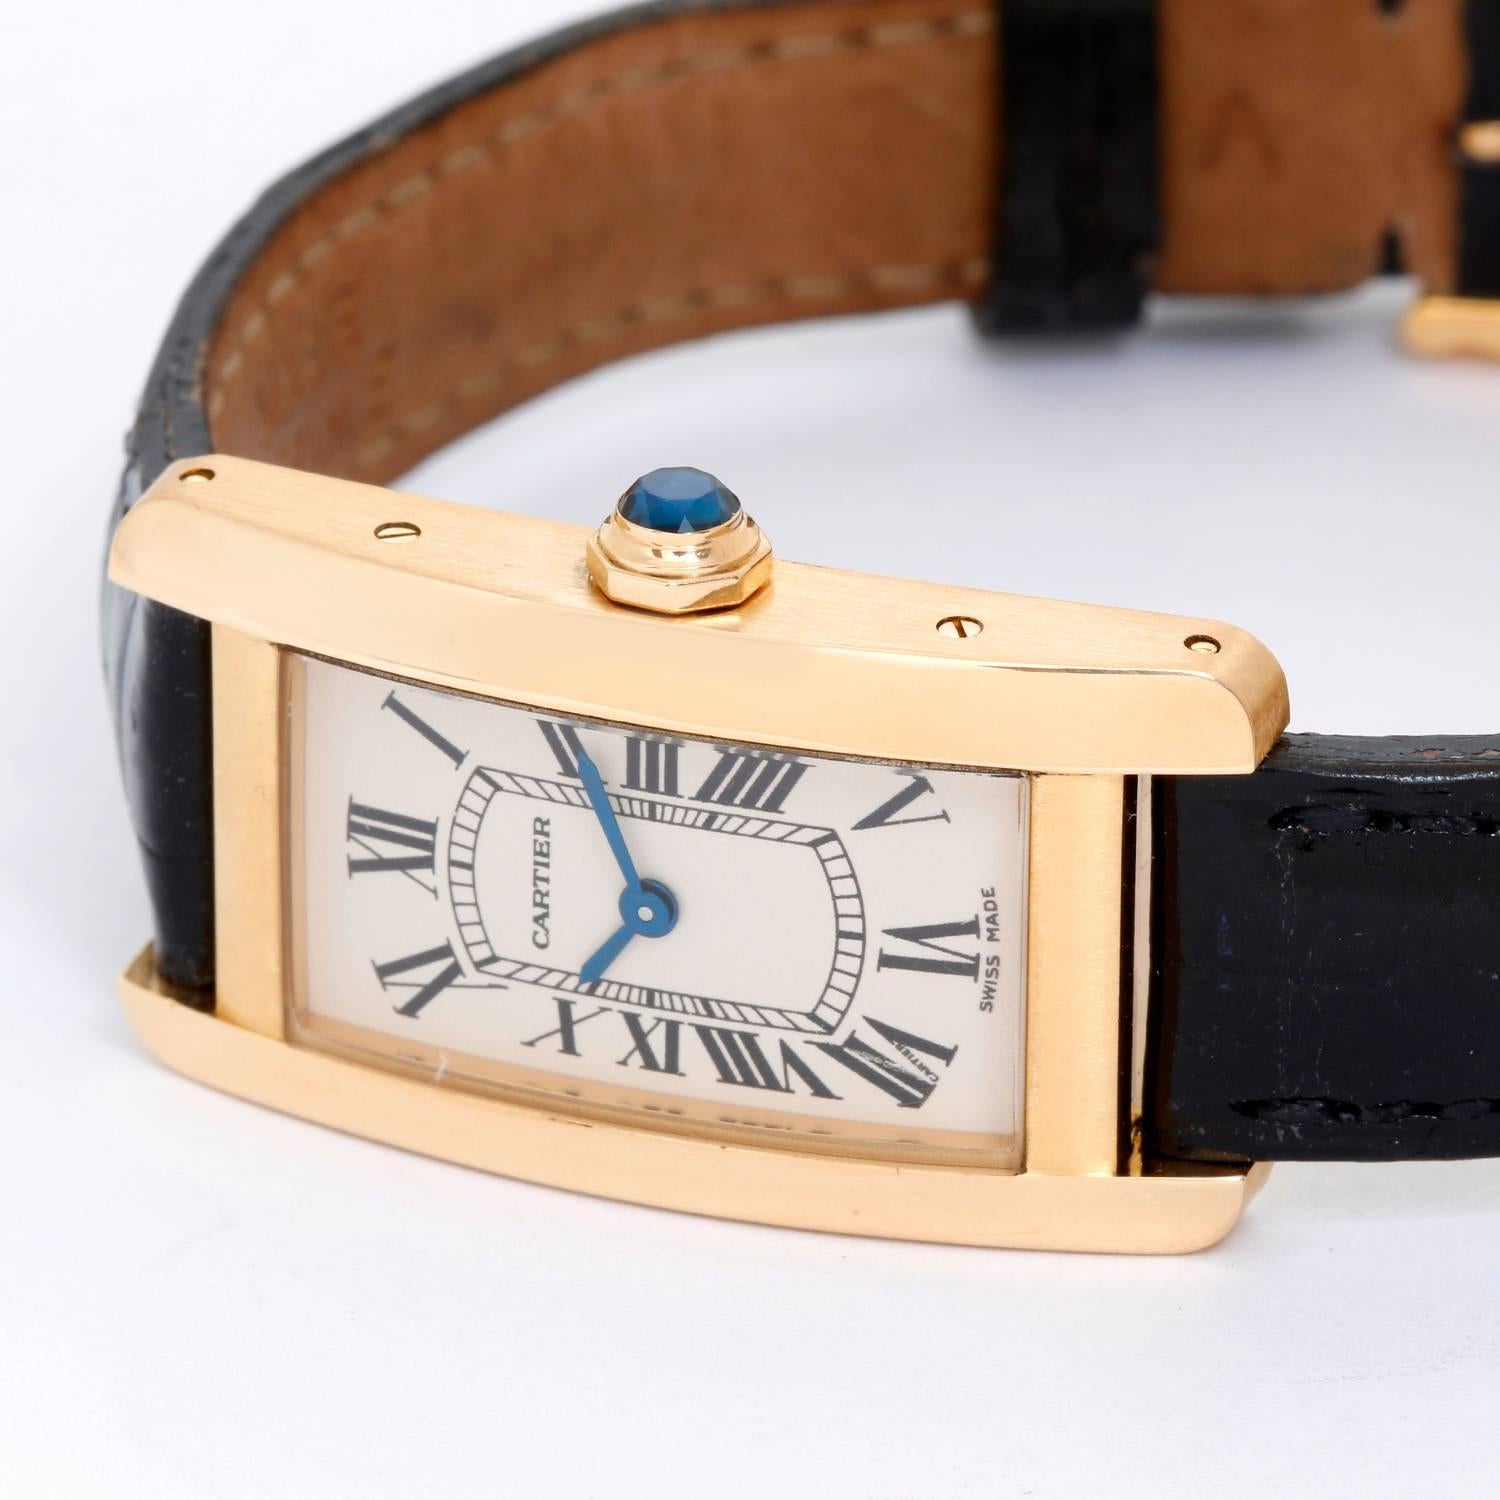 Cartier Tank Americaine Ladies 18k Yellow Gold Watch -  Quartz. 18k yellow gold case (19mm x 35mm). Ivory colored dial with black Roman numerals. 18K yellow gold Cartier bracelet will accommodate up to a 6.5 inch wrist. Pre-owned with box.